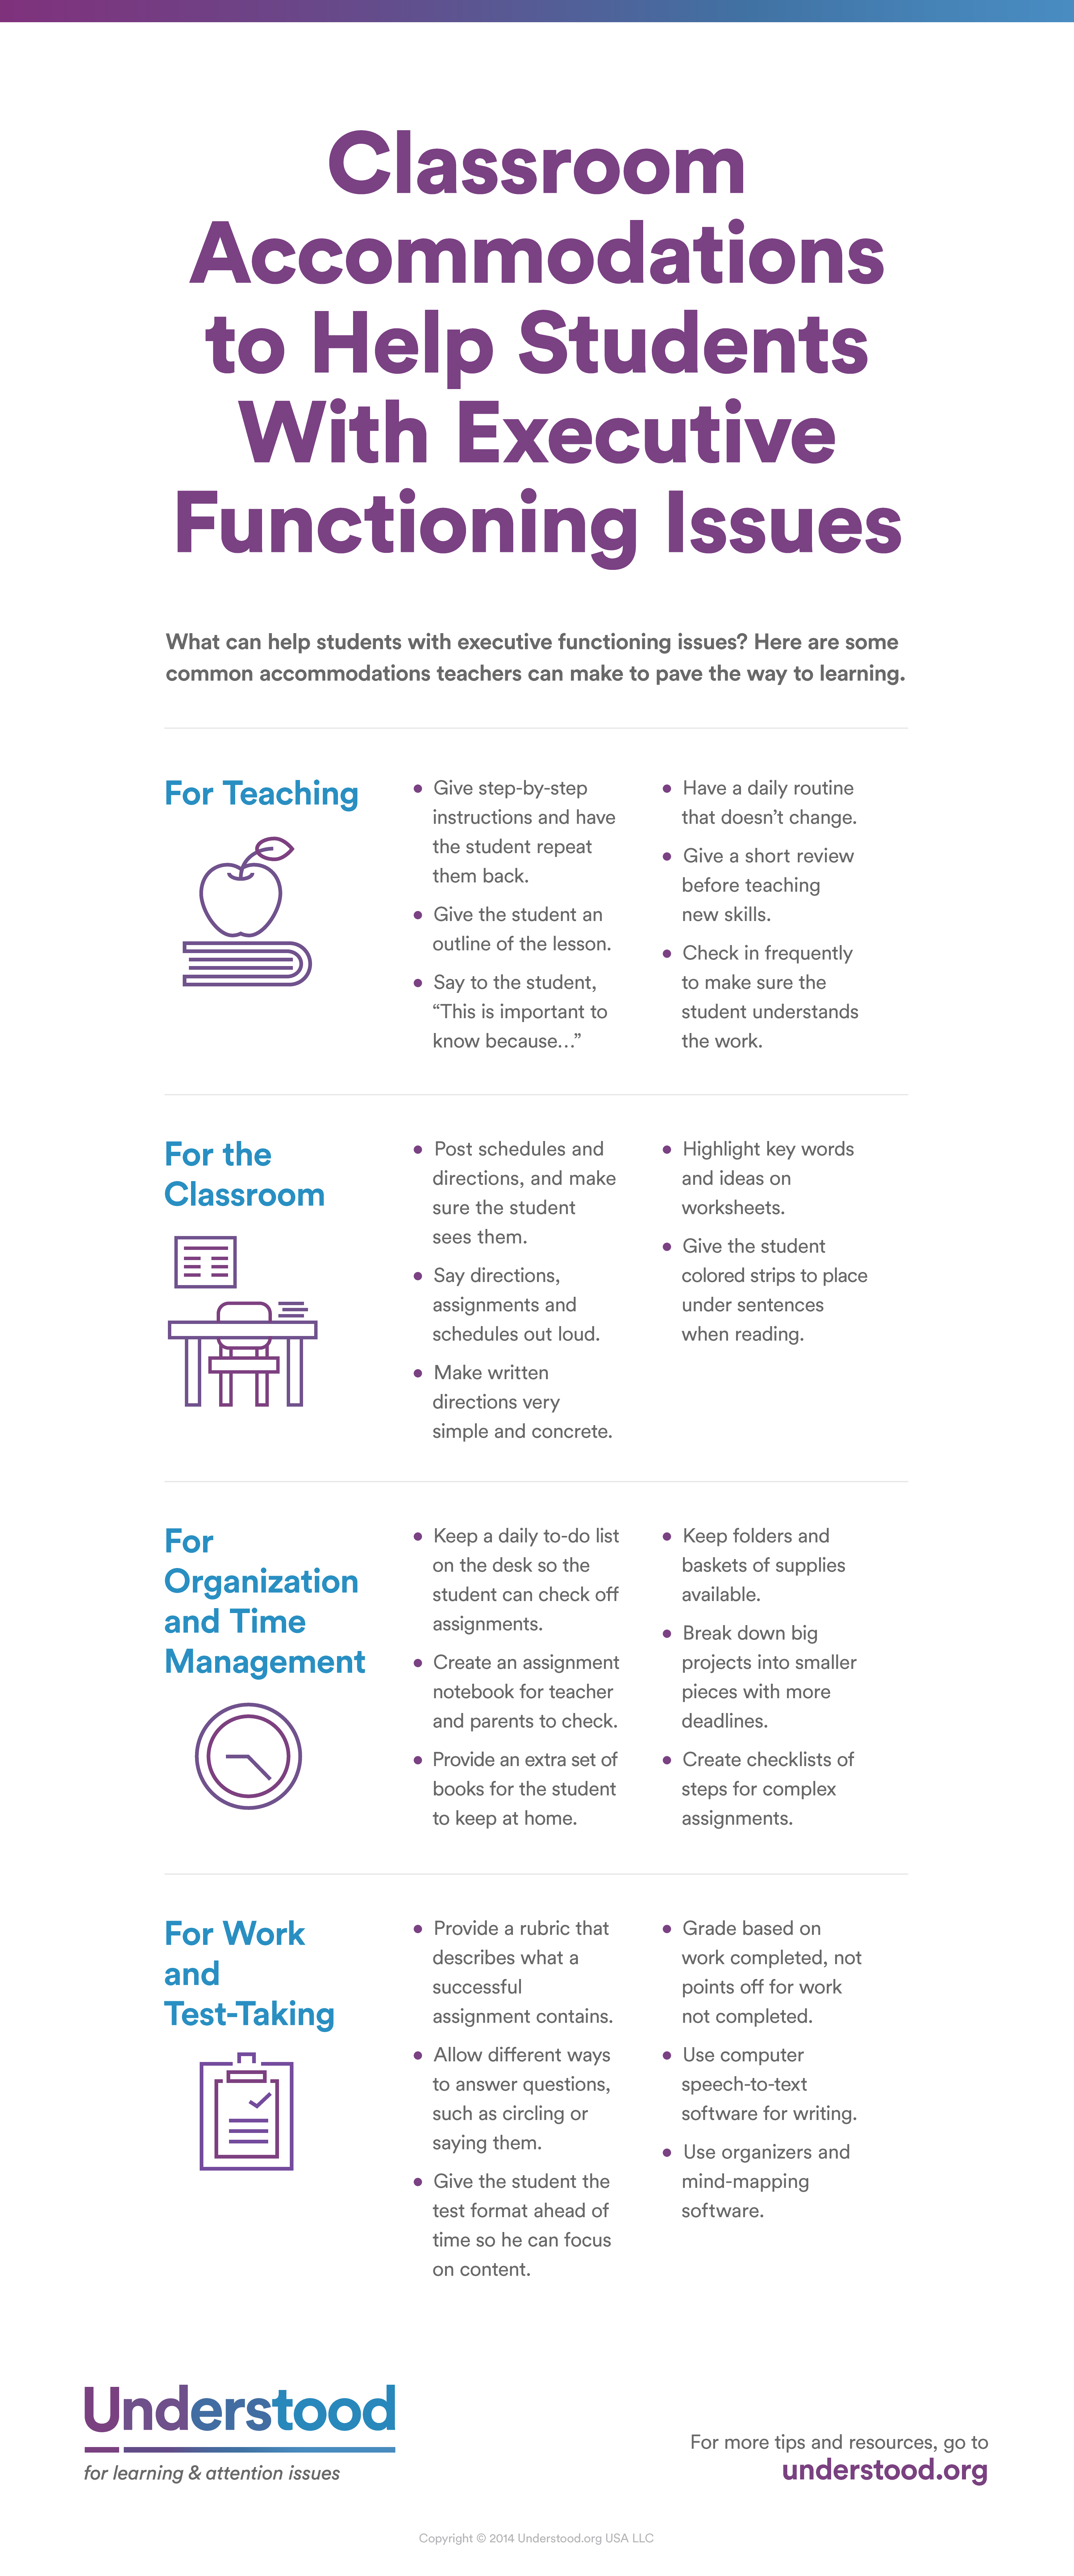 Classroom Accommodations to Help Students with Dyslexia (Infograph)